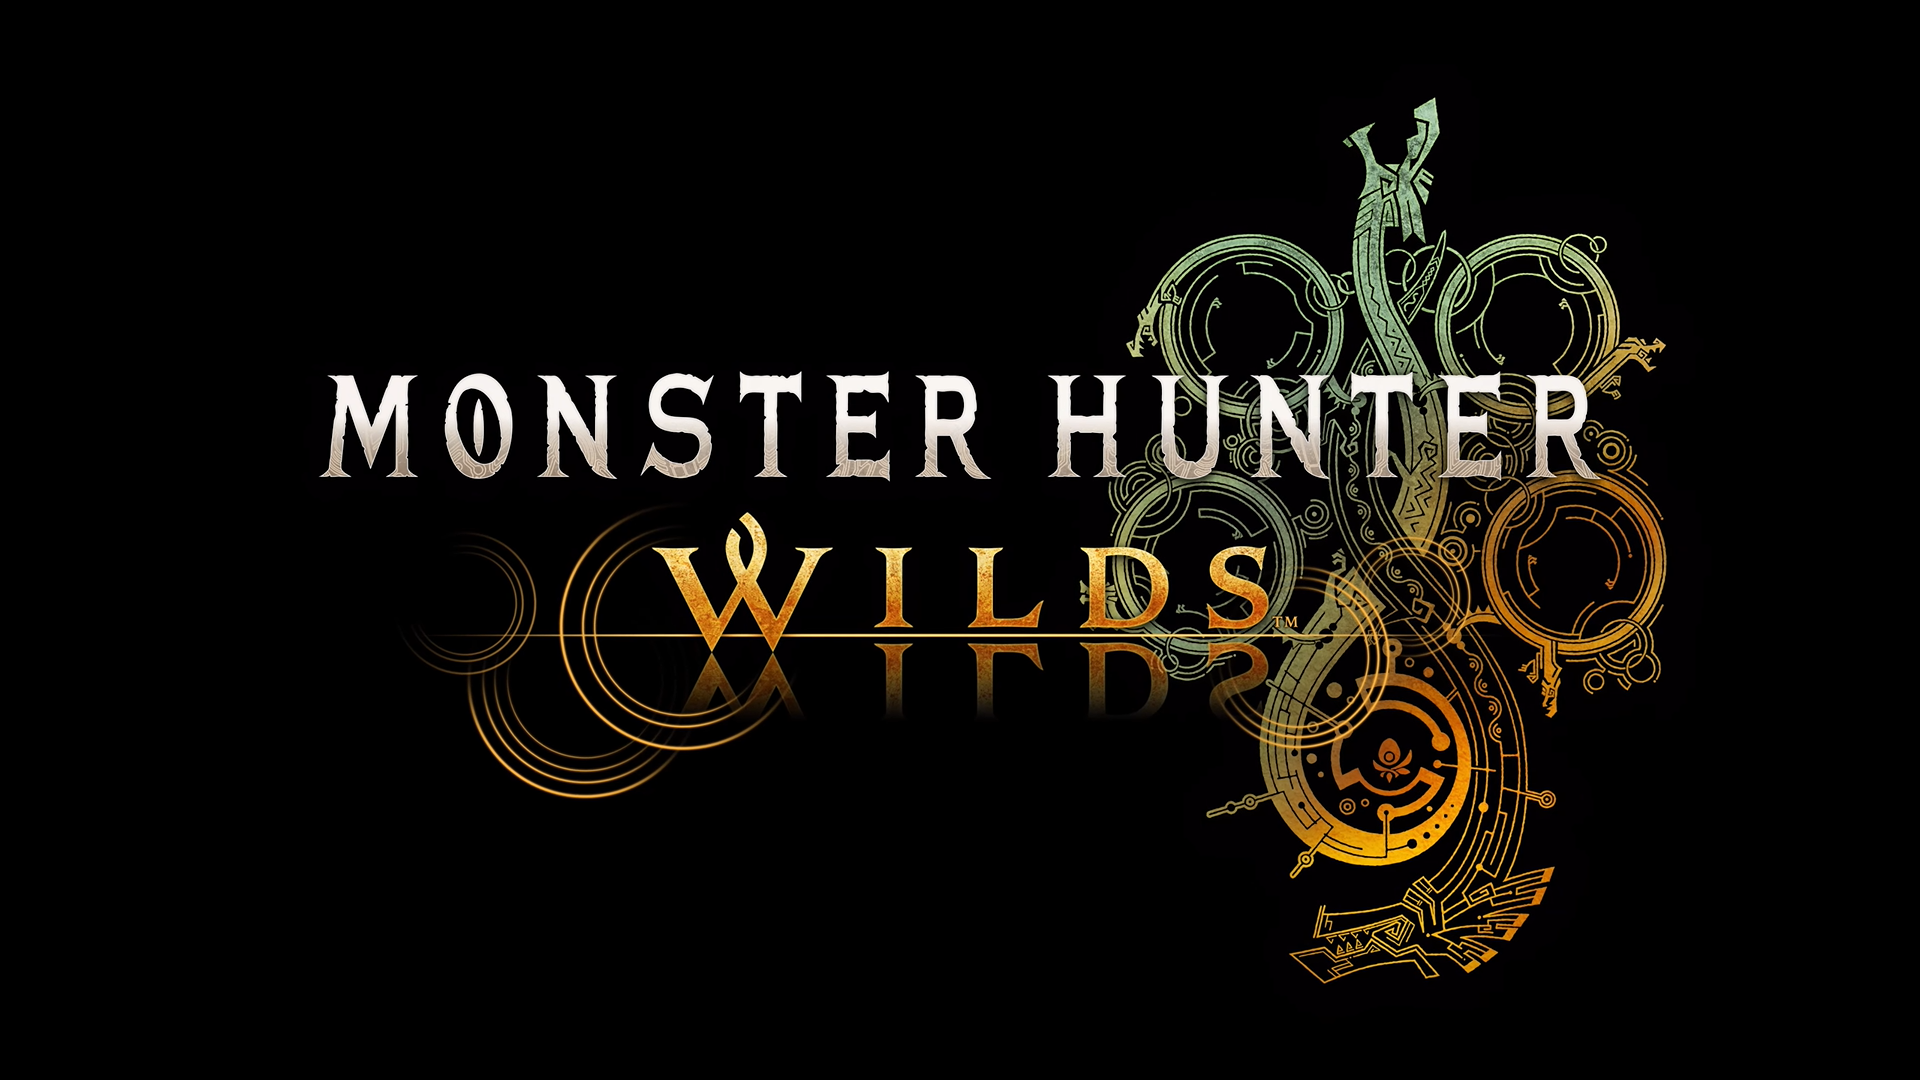 "Monster Hunter Wilds" Unveils First Promotional Video, Venture into Vast Wilderness to Challenge Ferocious Monsters.